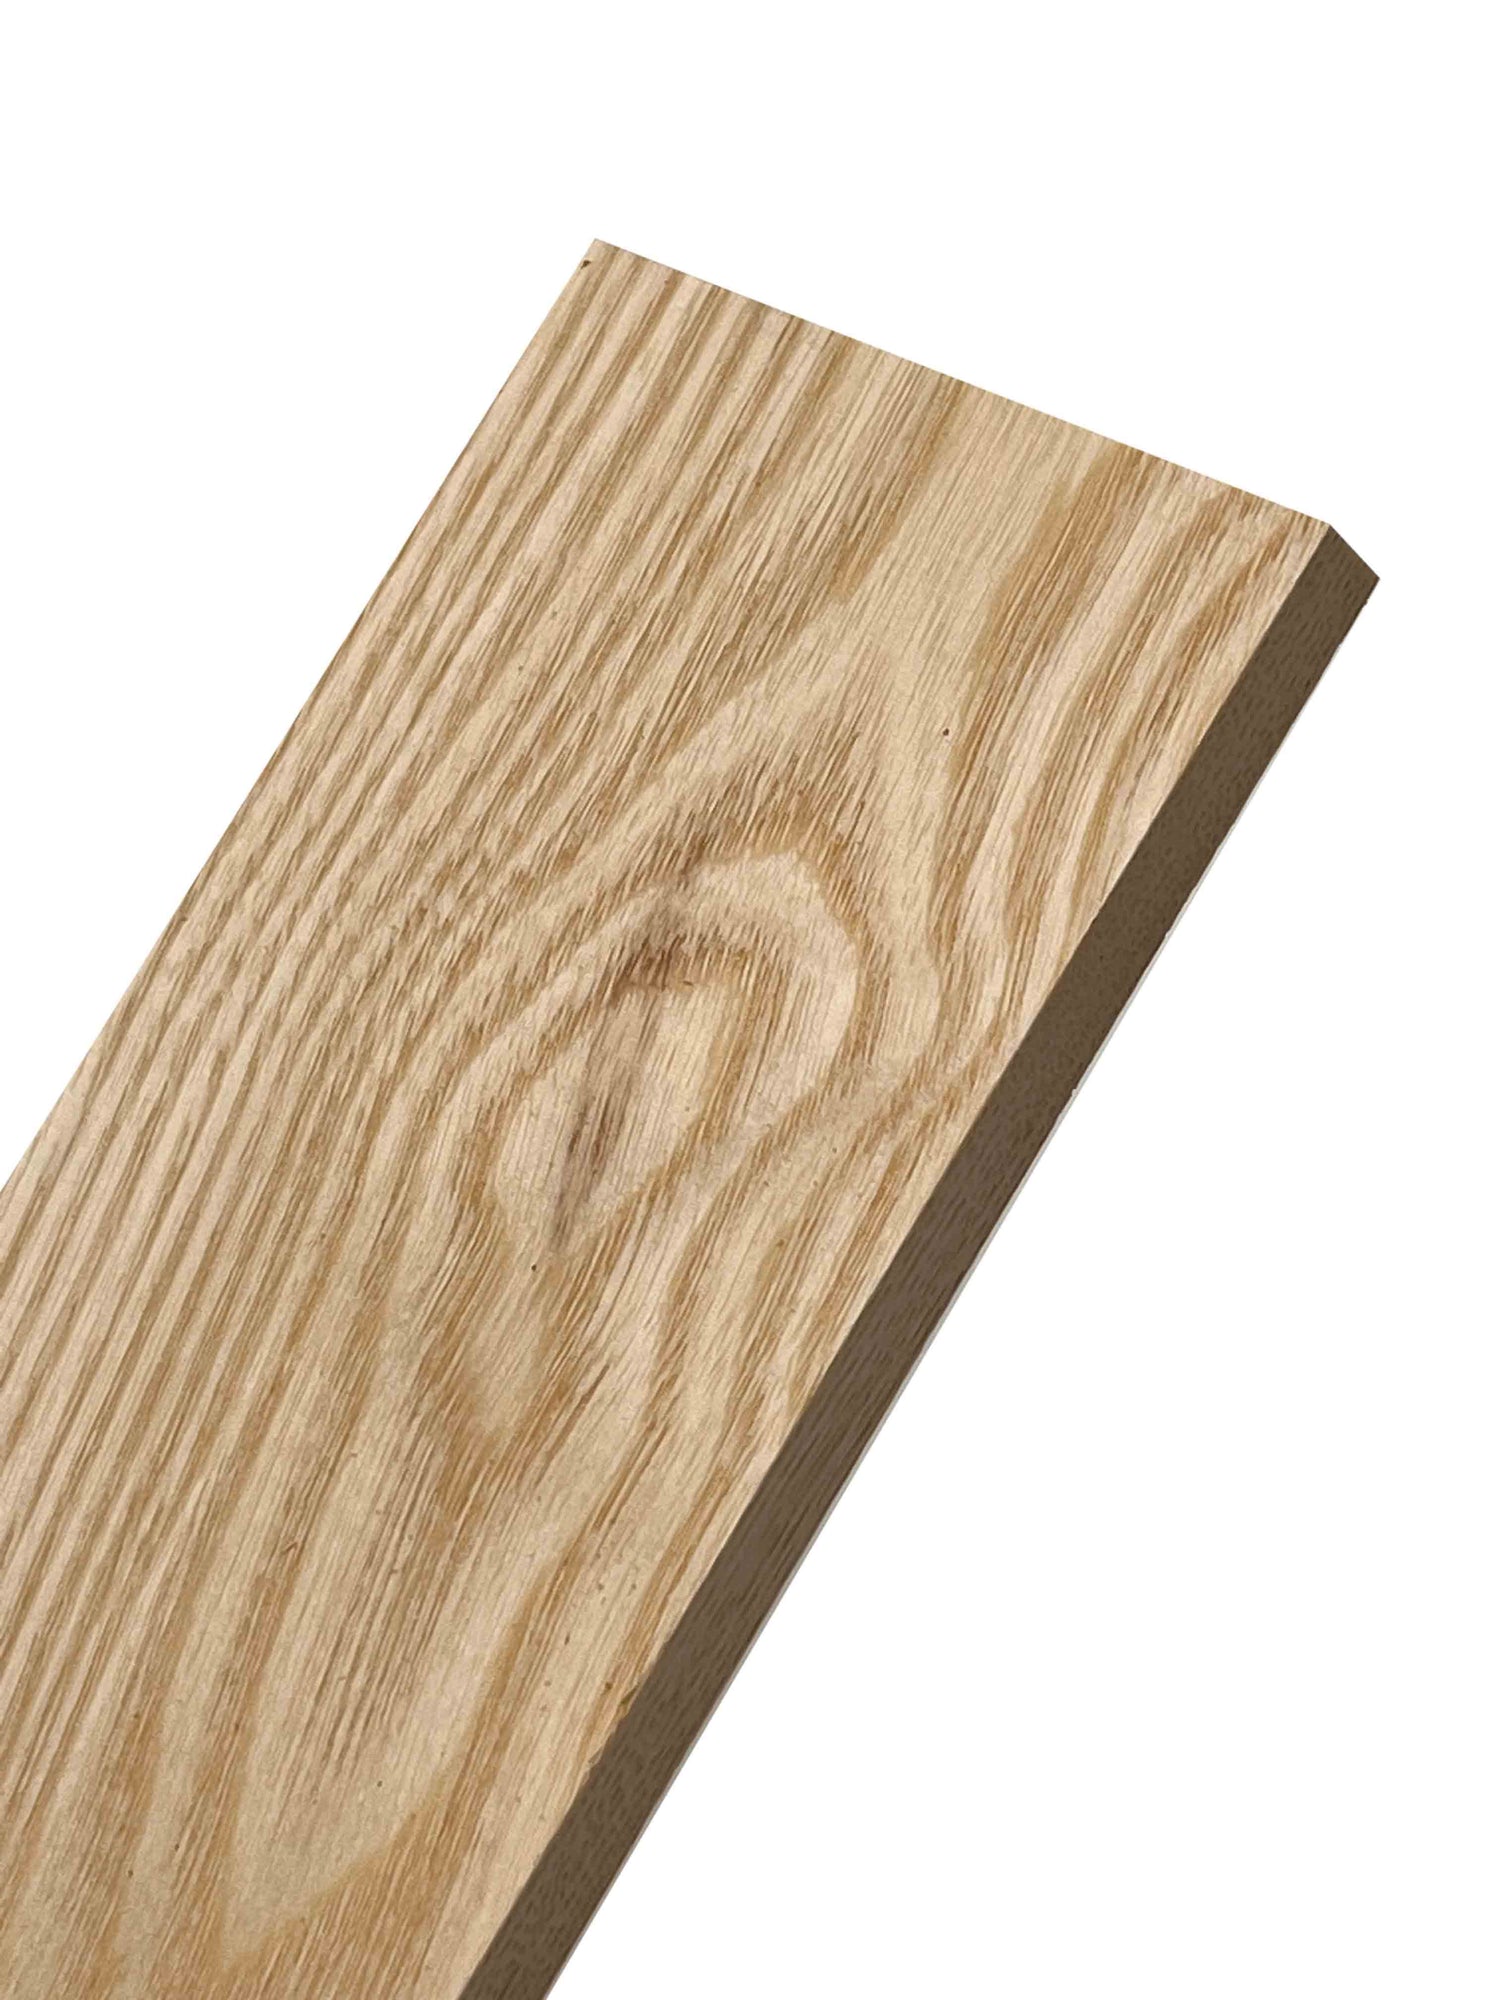 Ash Thin Stock Lumber Boards Wood Crafts - Exotic Wood Zone - Buy online Across USA 